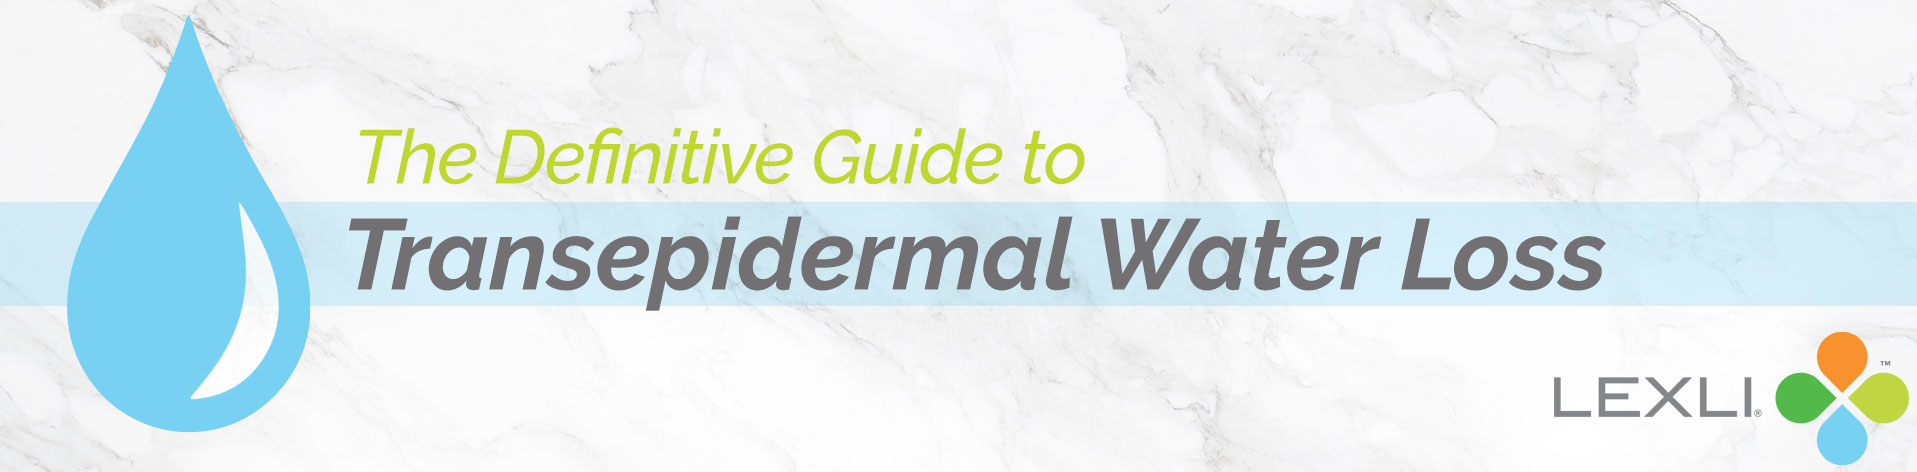 The Definitive Guide to Transepidermal Water Loss